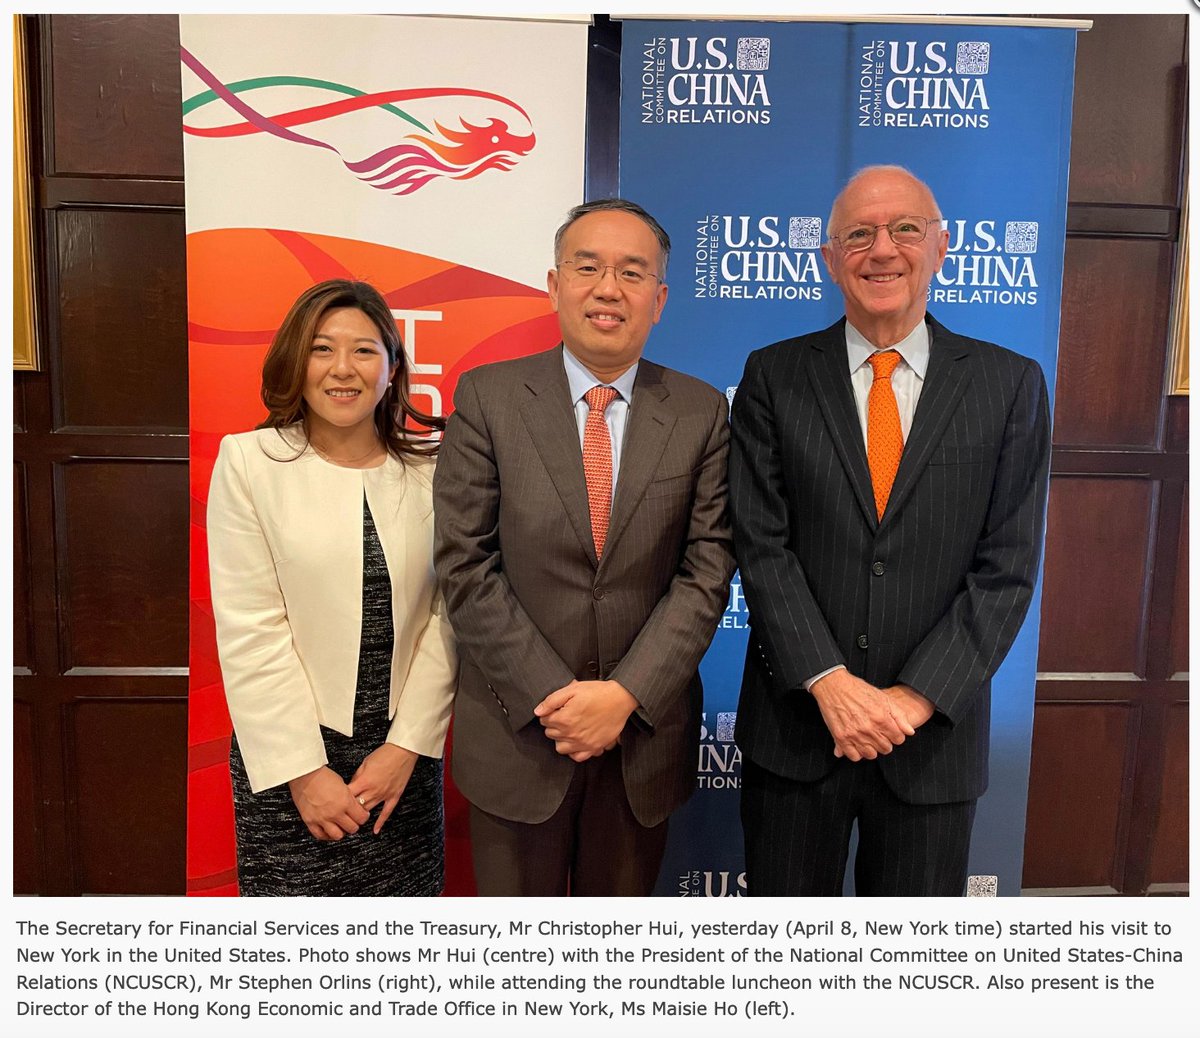 #HongKong government minister Christopher Hui is visiting the US this week, the 1st visit by an HK official since the crackdown in HK began in 2020 (excepting Paul Chan at APEC). Hui met @NCUSCR head @sorlins, who co-hosted Xi Jinping during APEC. info.gov.hk/gia/general/20…